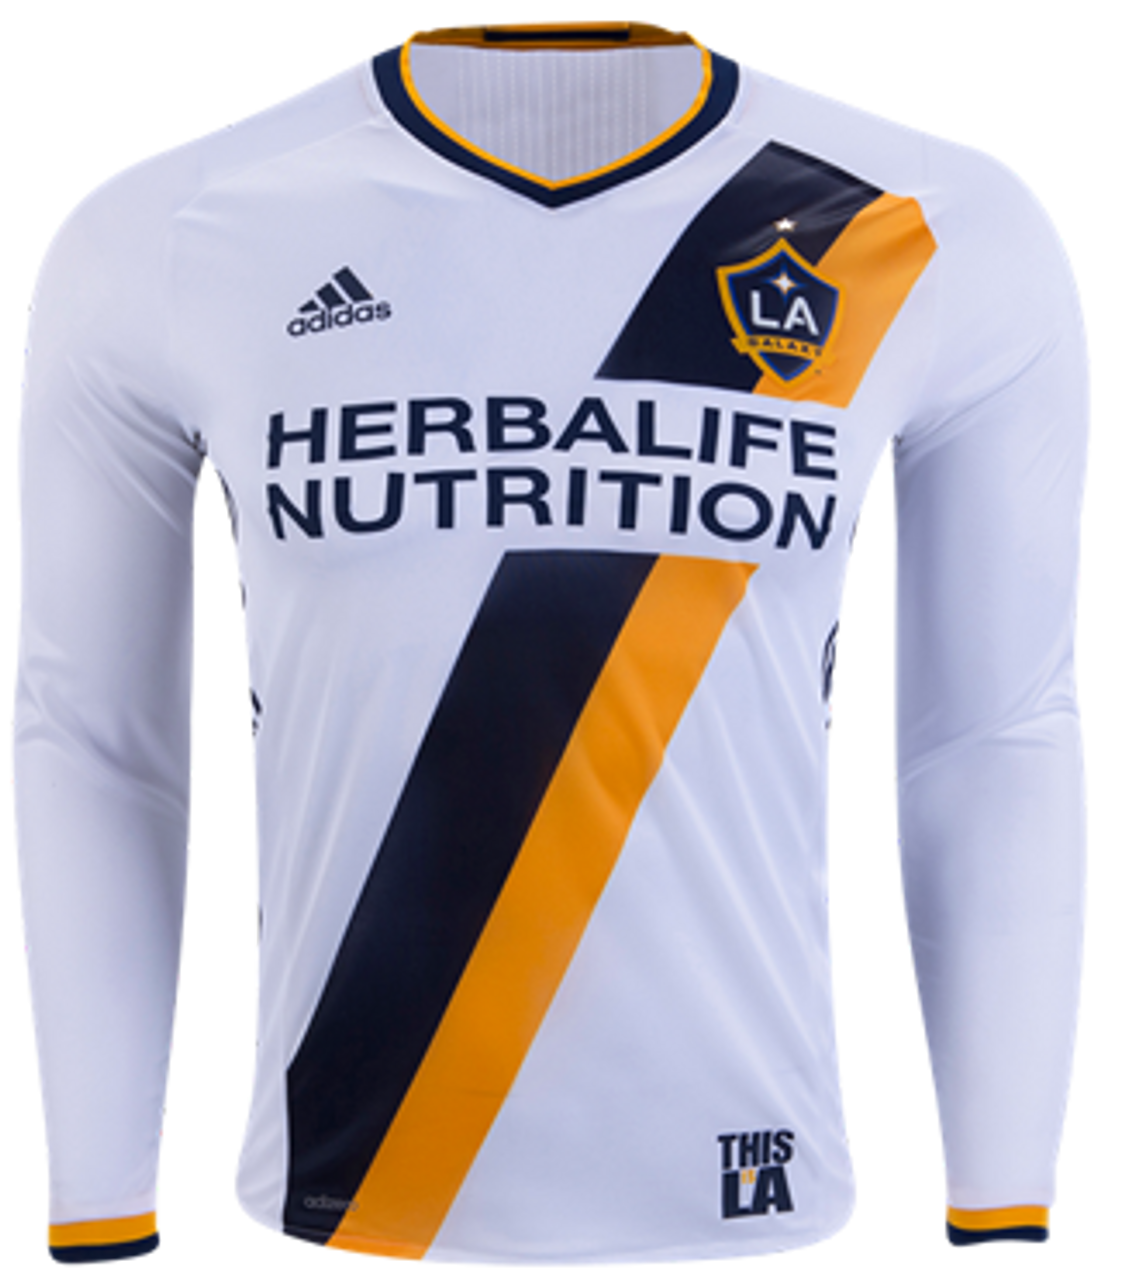 Adidas LA Galaxy Jersey Multiple Size XL - $70 New With Tags